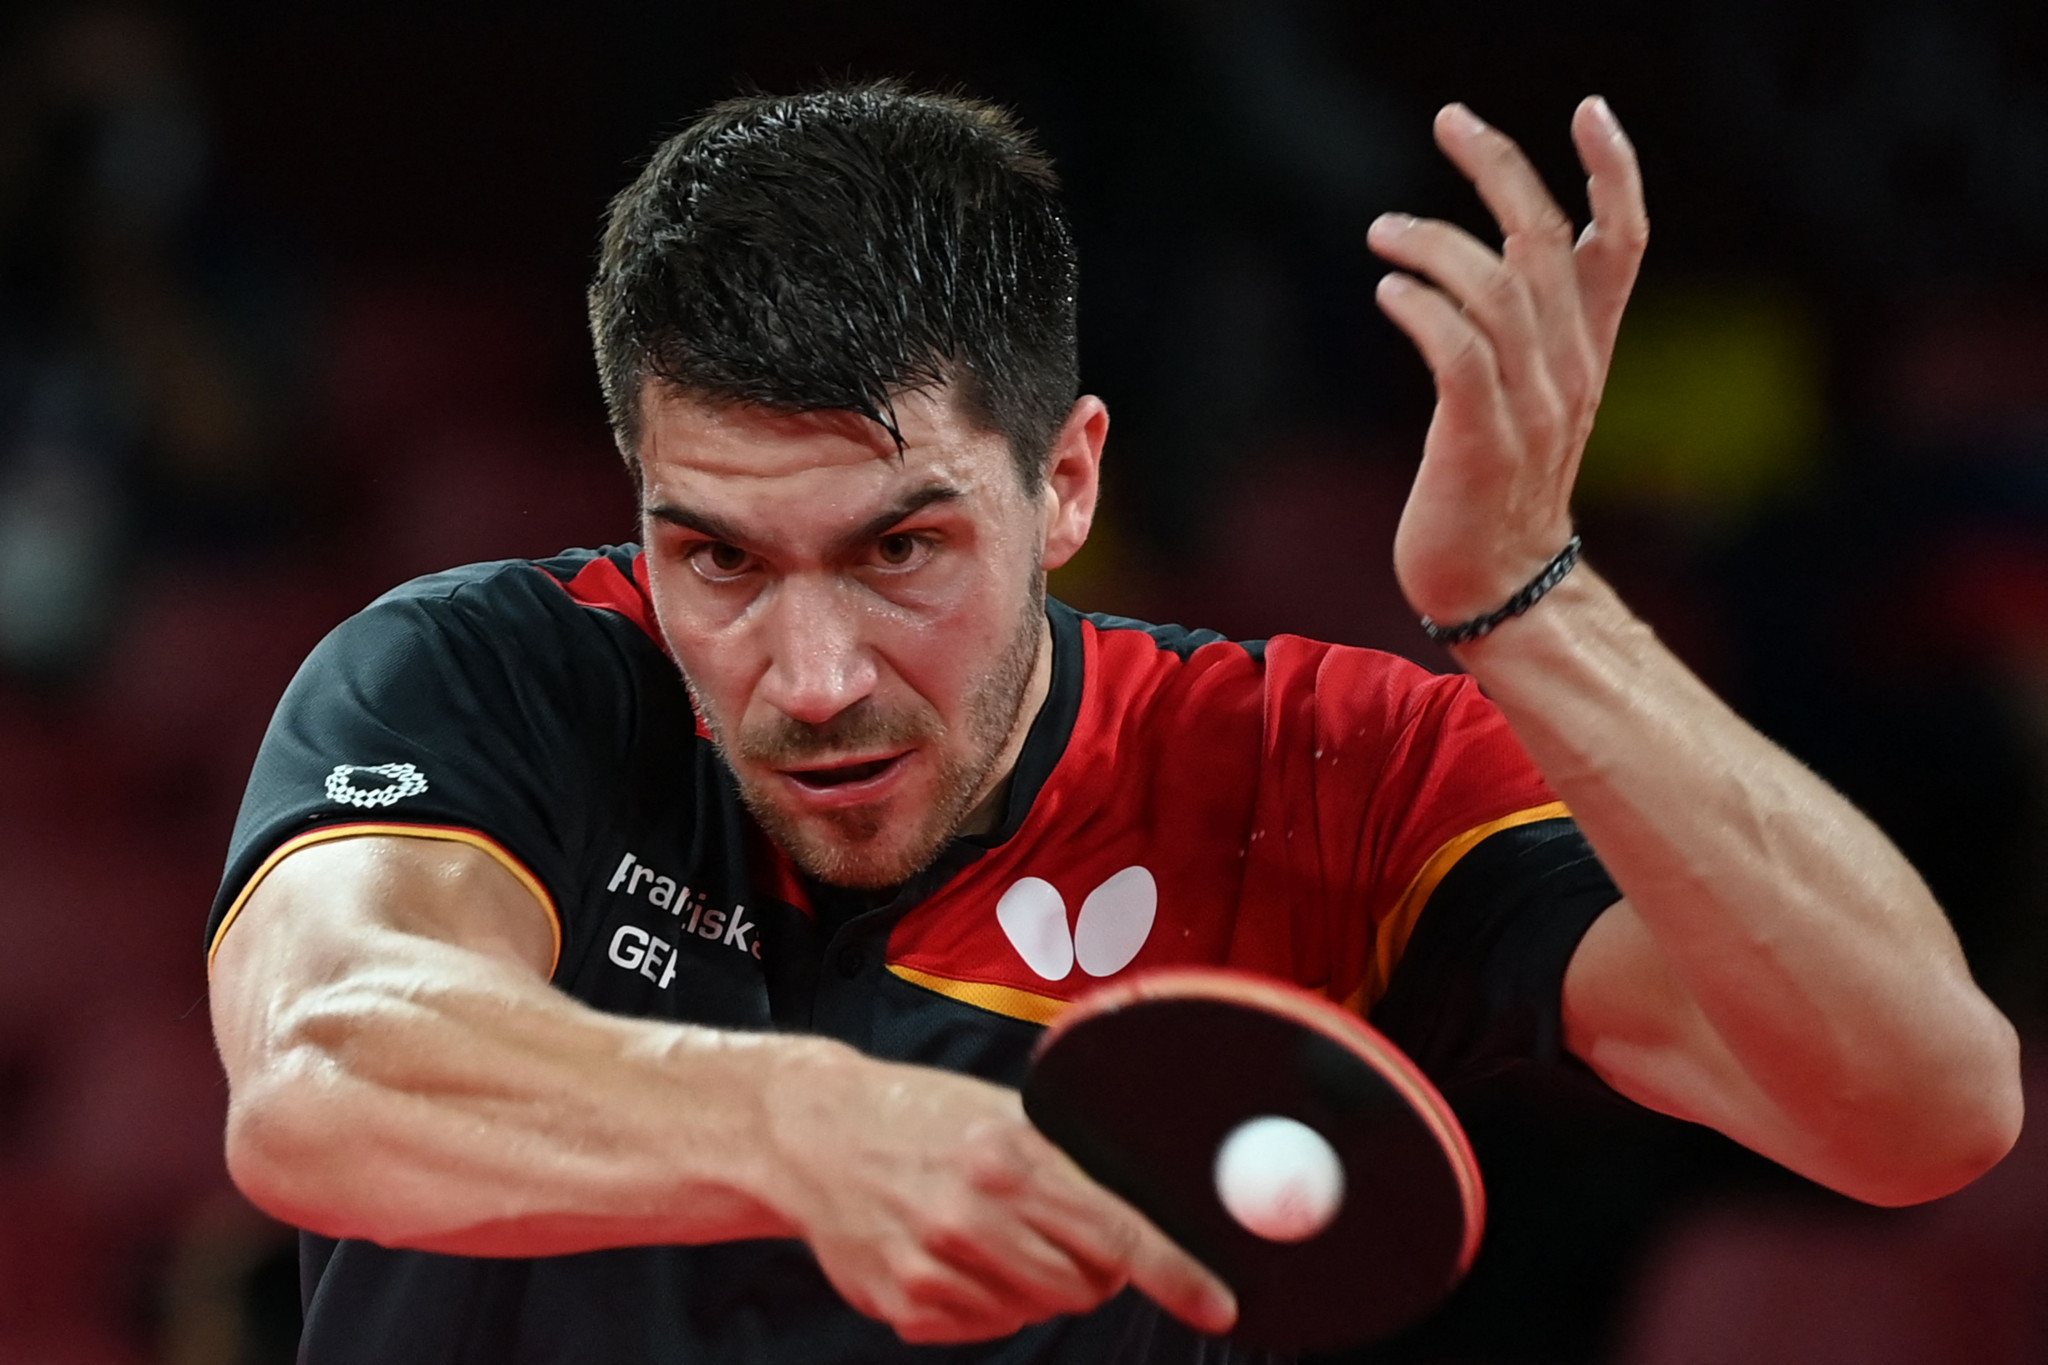 Patrick Franziska won two matches for Germany as they claimed the men's European Team Table Tennis Championships crown ©Getty Images